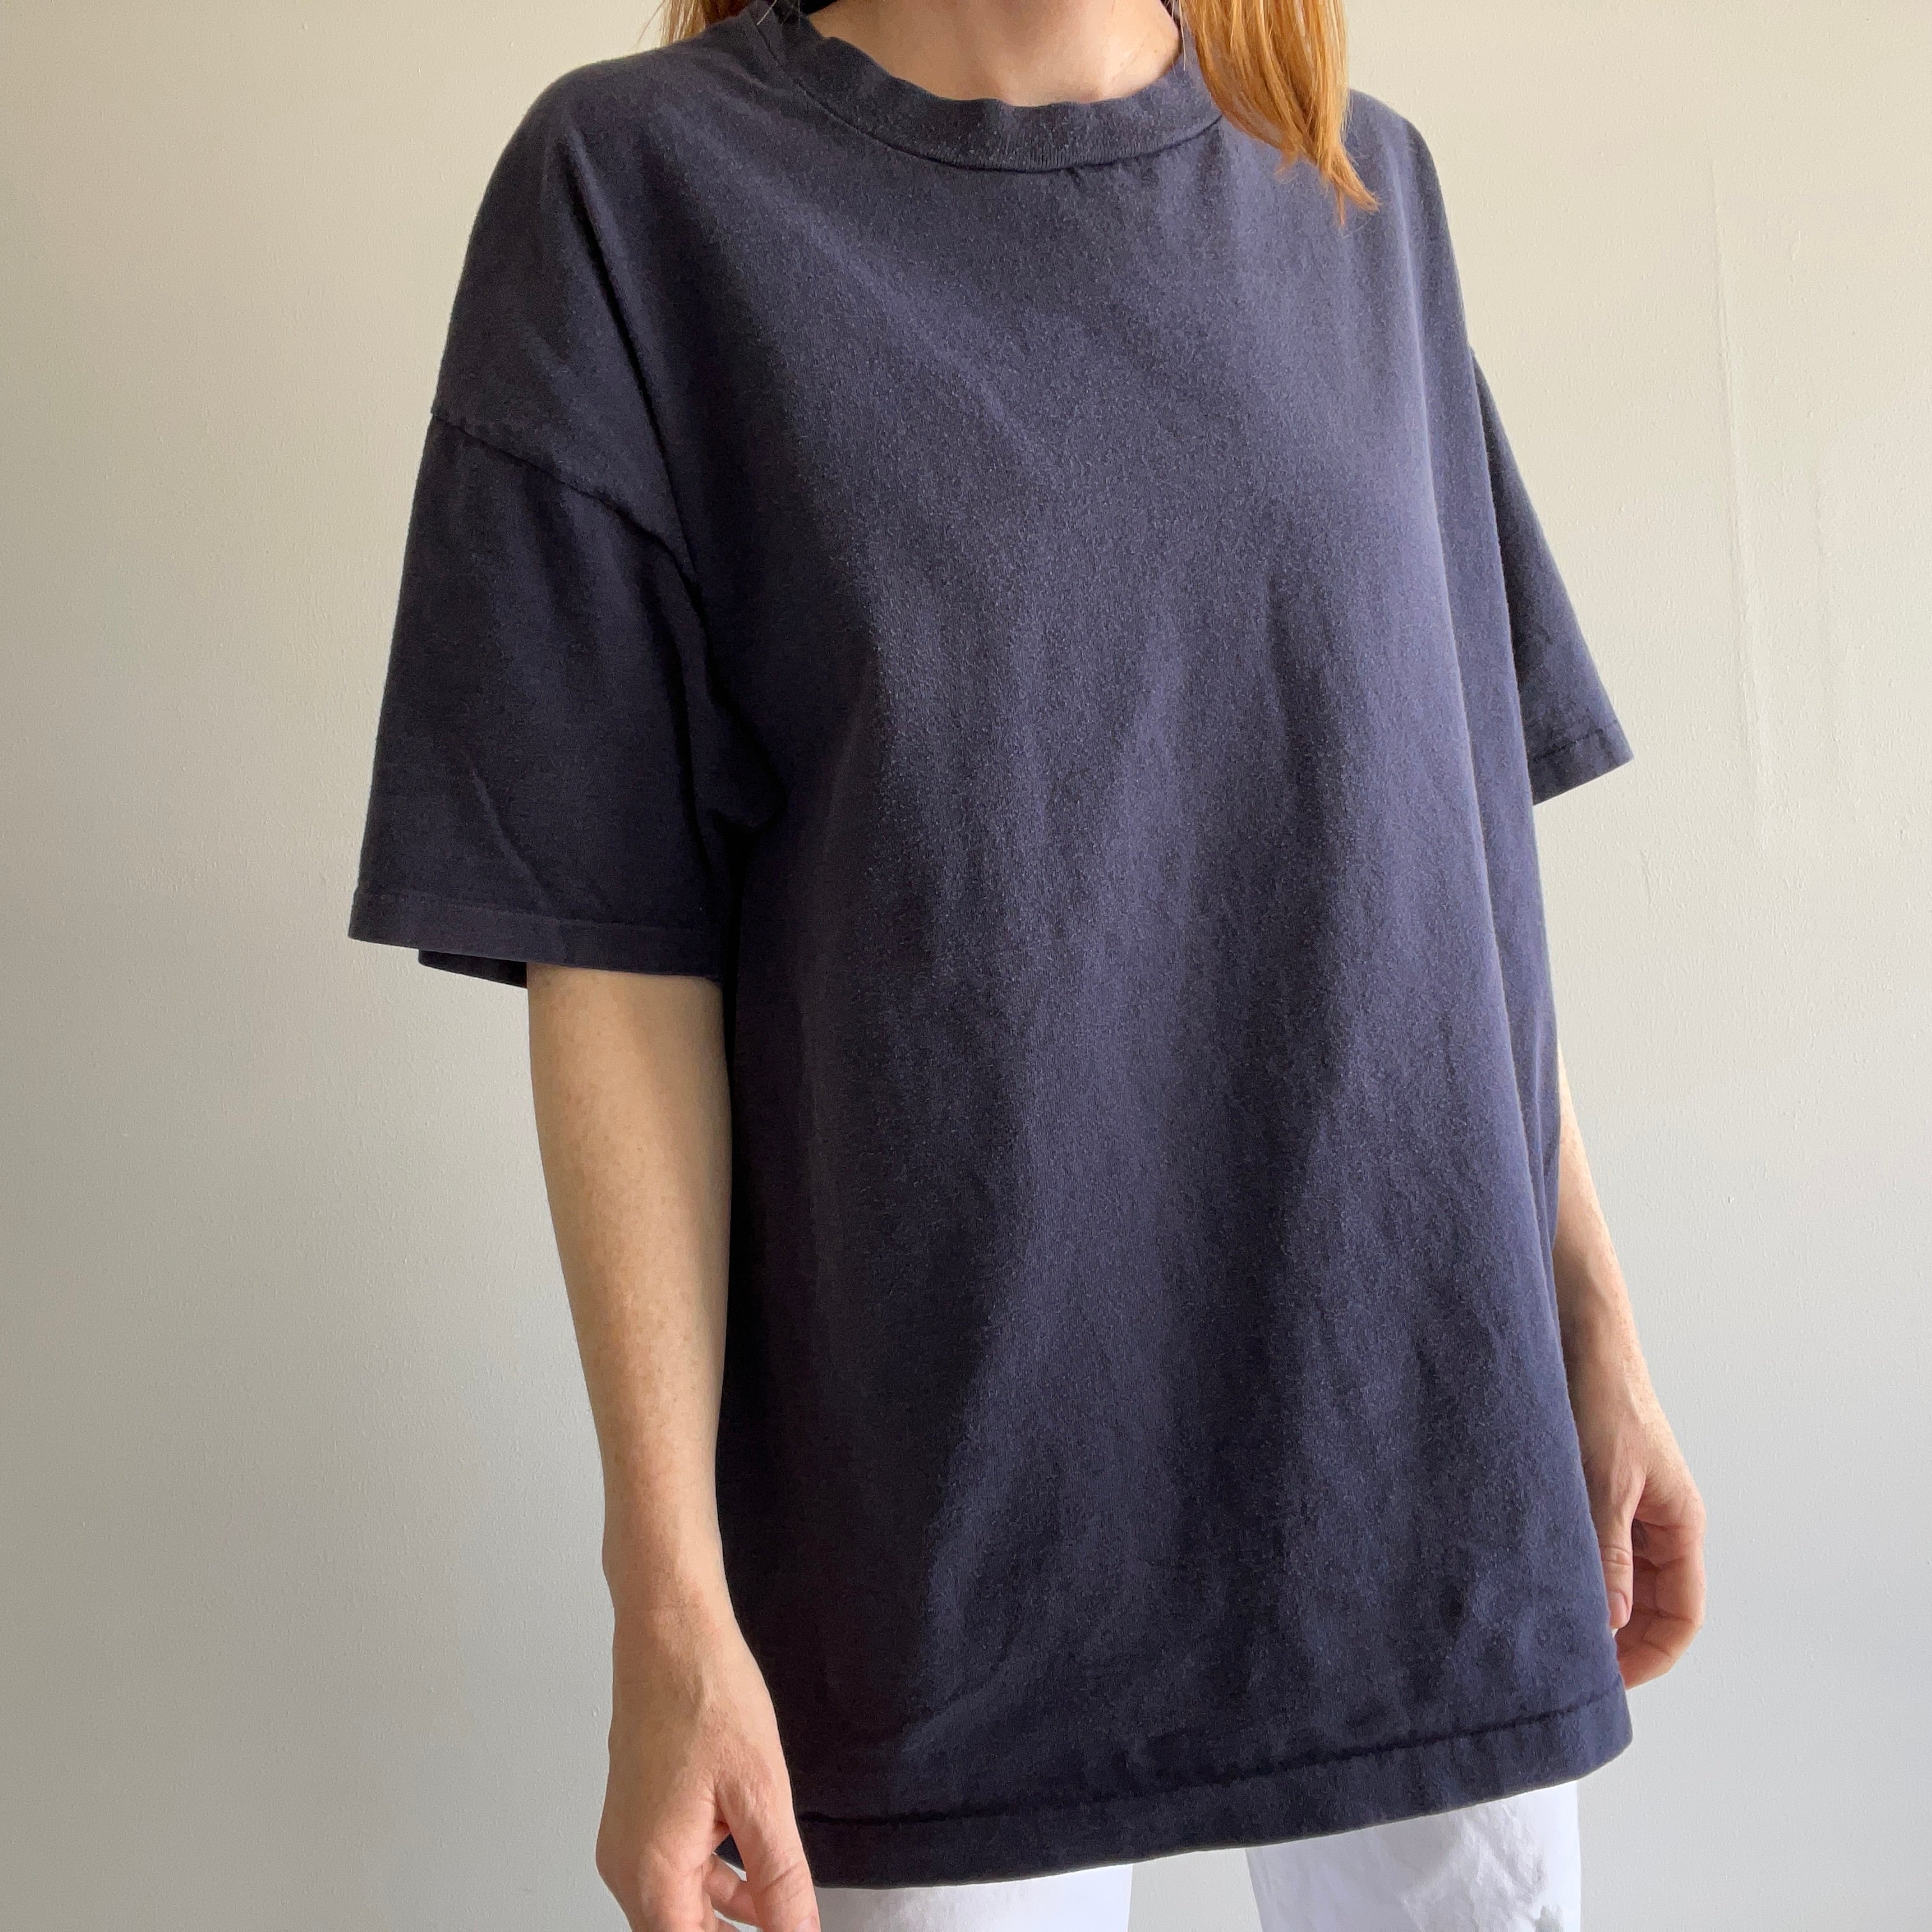 1990s Faded Navy Cotton T-Shirt - Oversized Cut